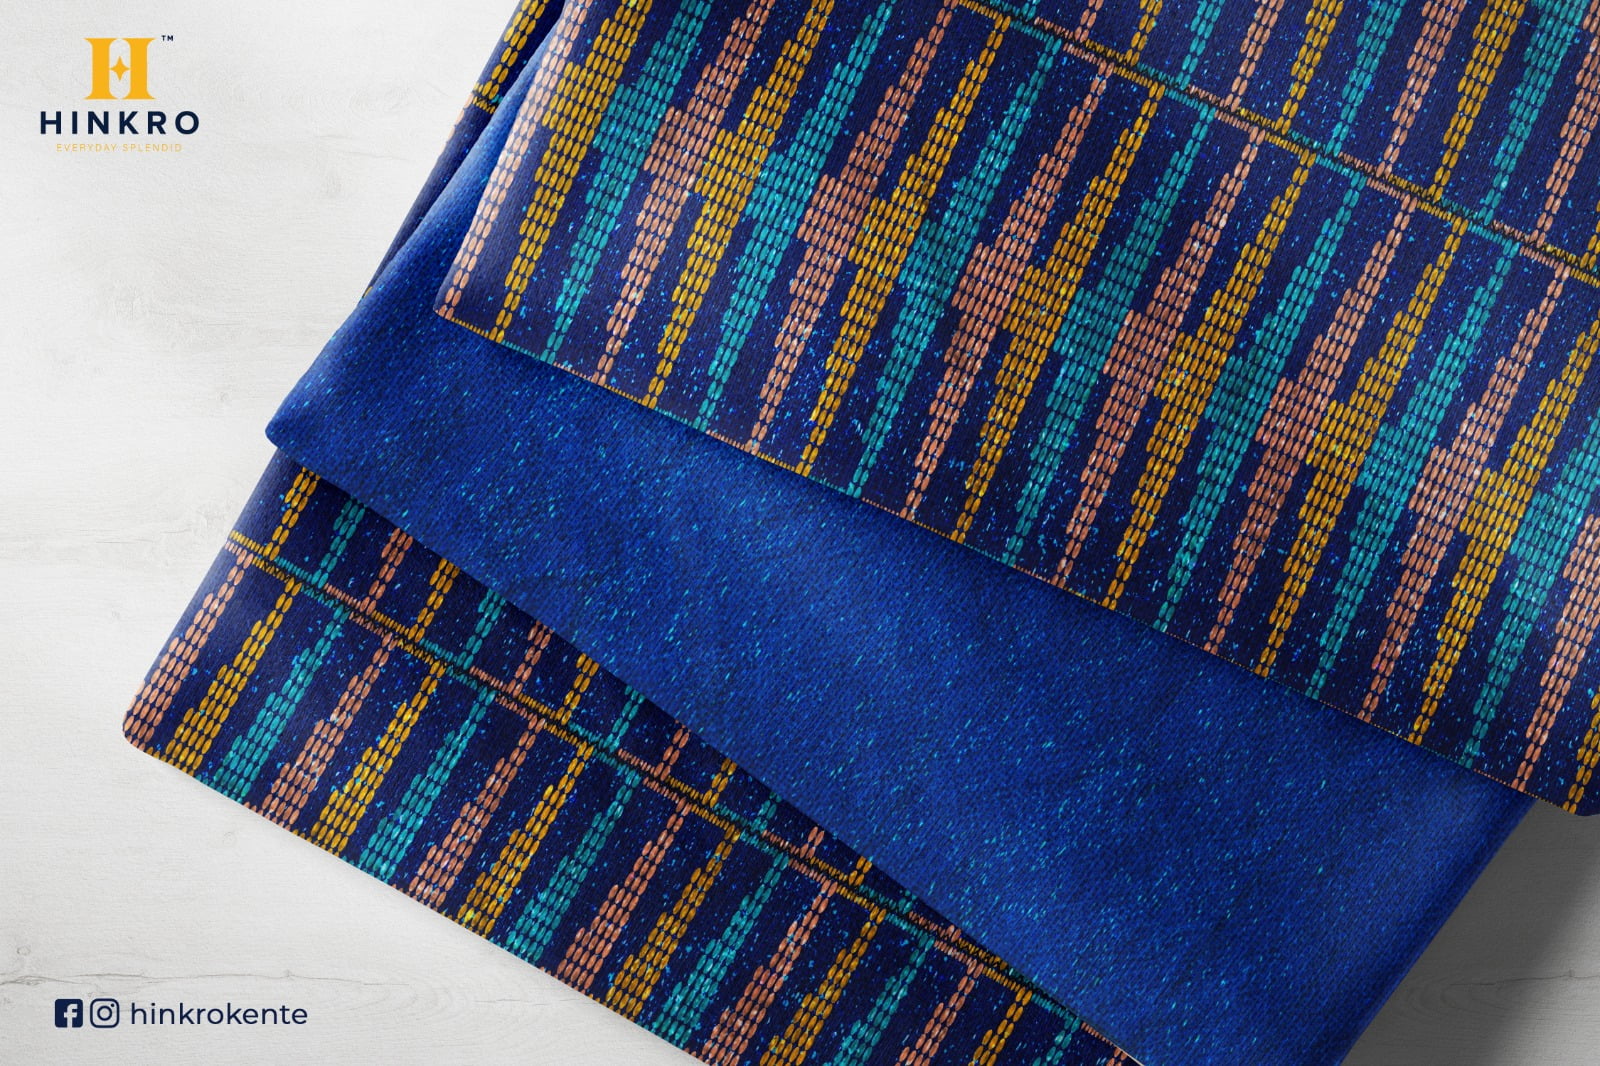 Royal Blue, Peach and Gold Kente Fabric with Shimmering plain